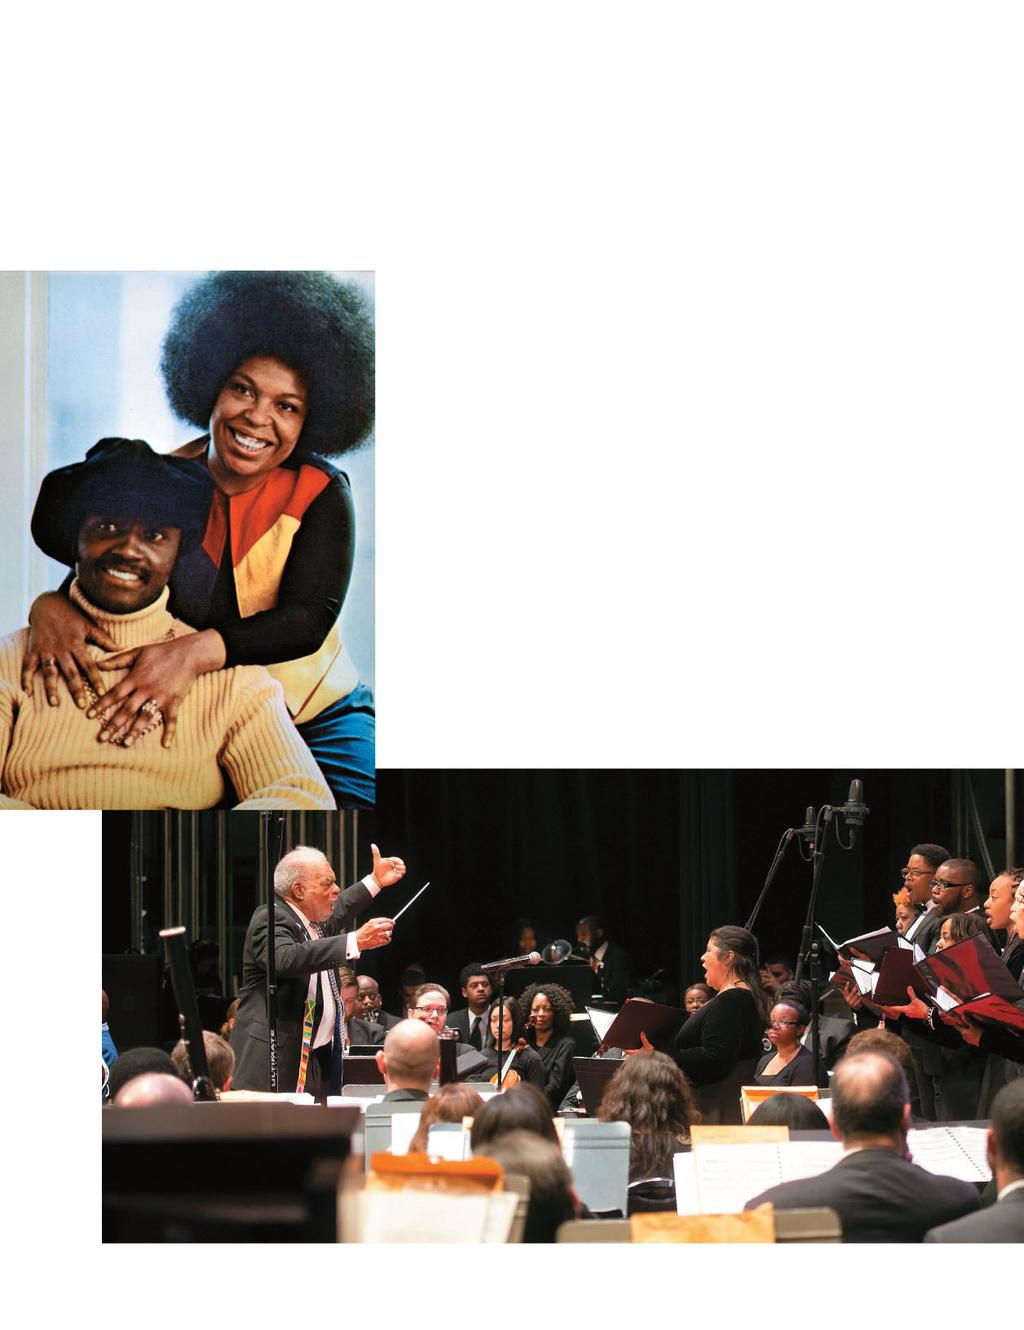 Former classmates Donny Hathaway and Roberta Flack created some memorable hits together.